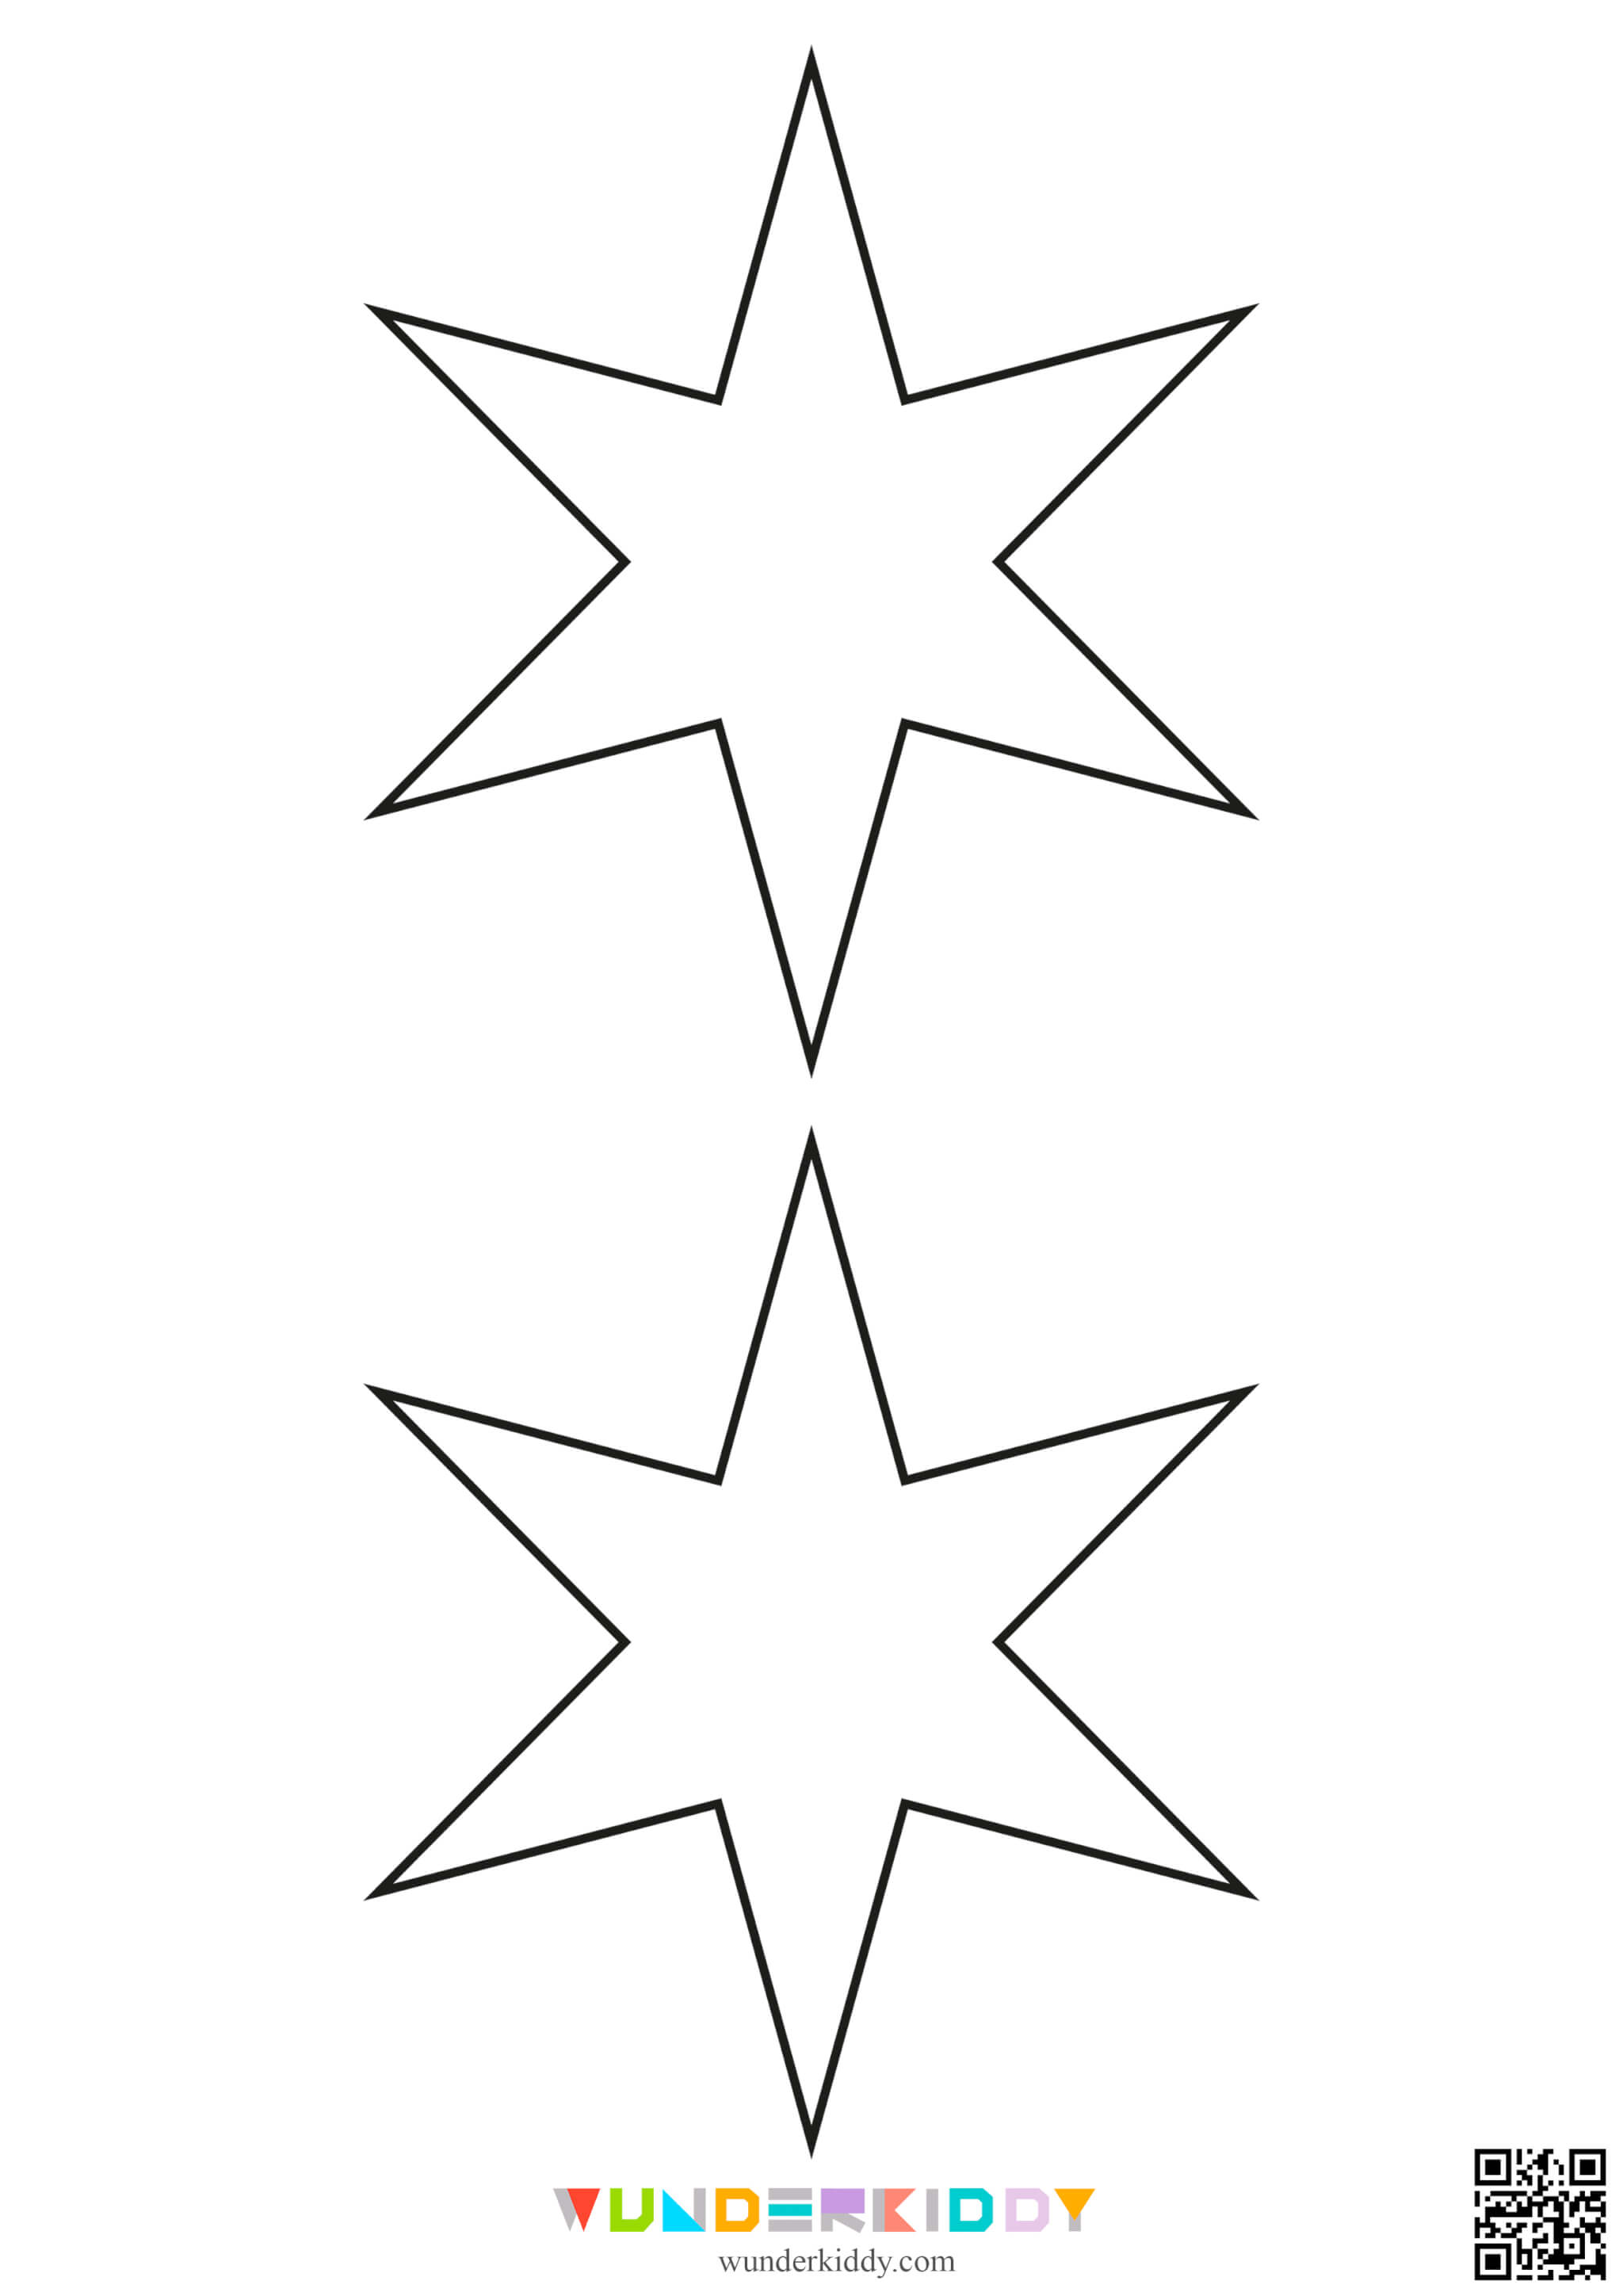 Star Outlines Templates - Image 9